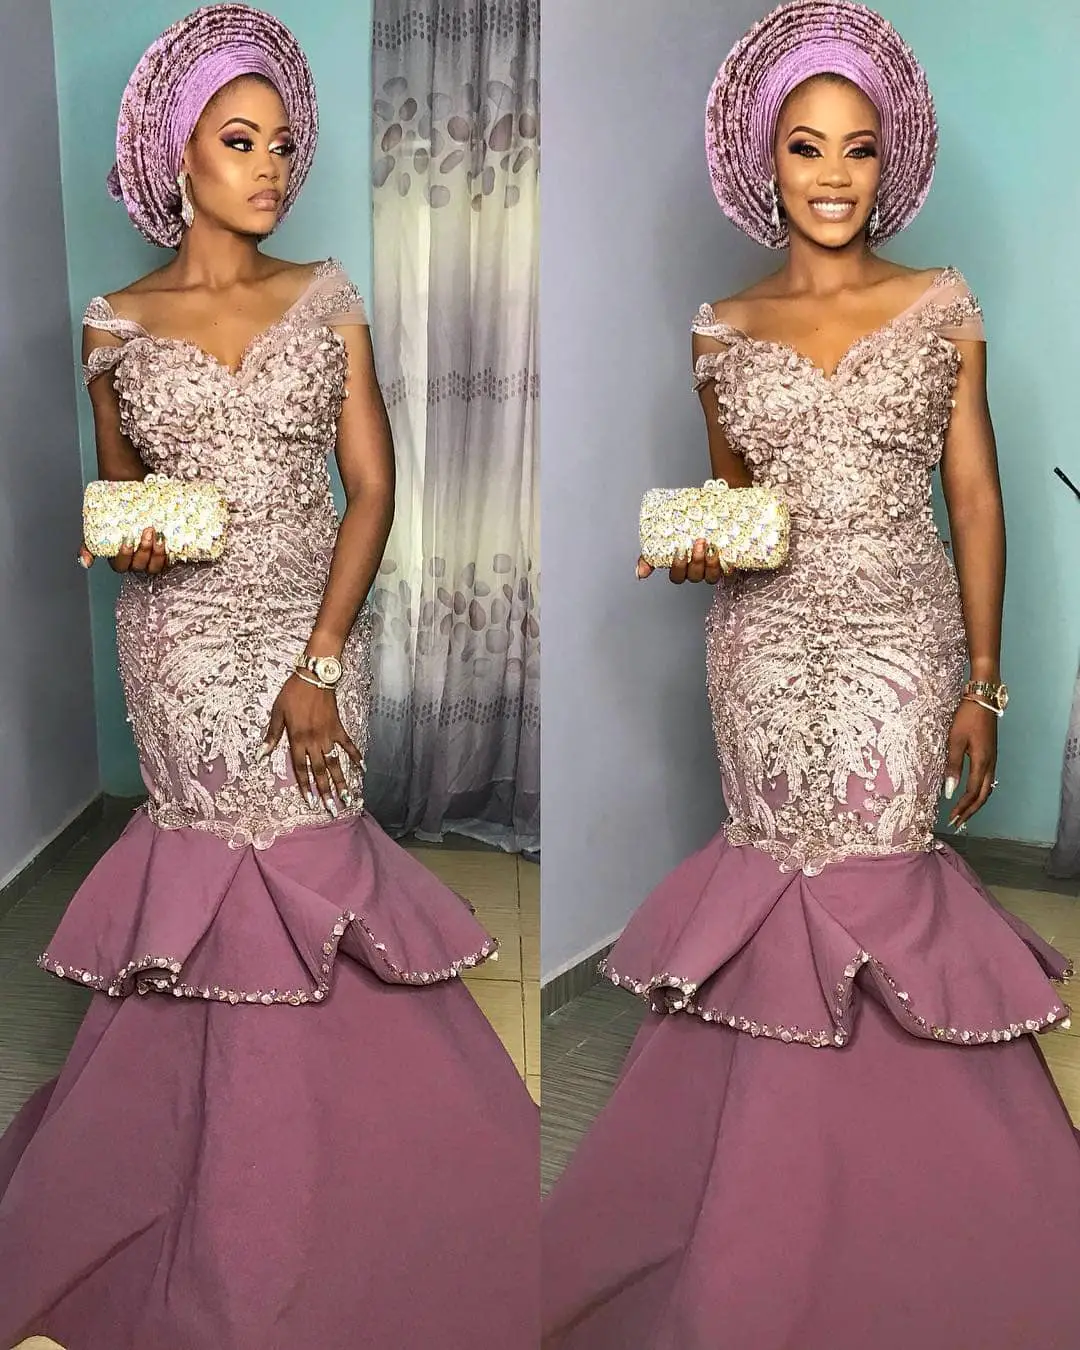 Super Classy Asoebi Lace Styles From The Gram